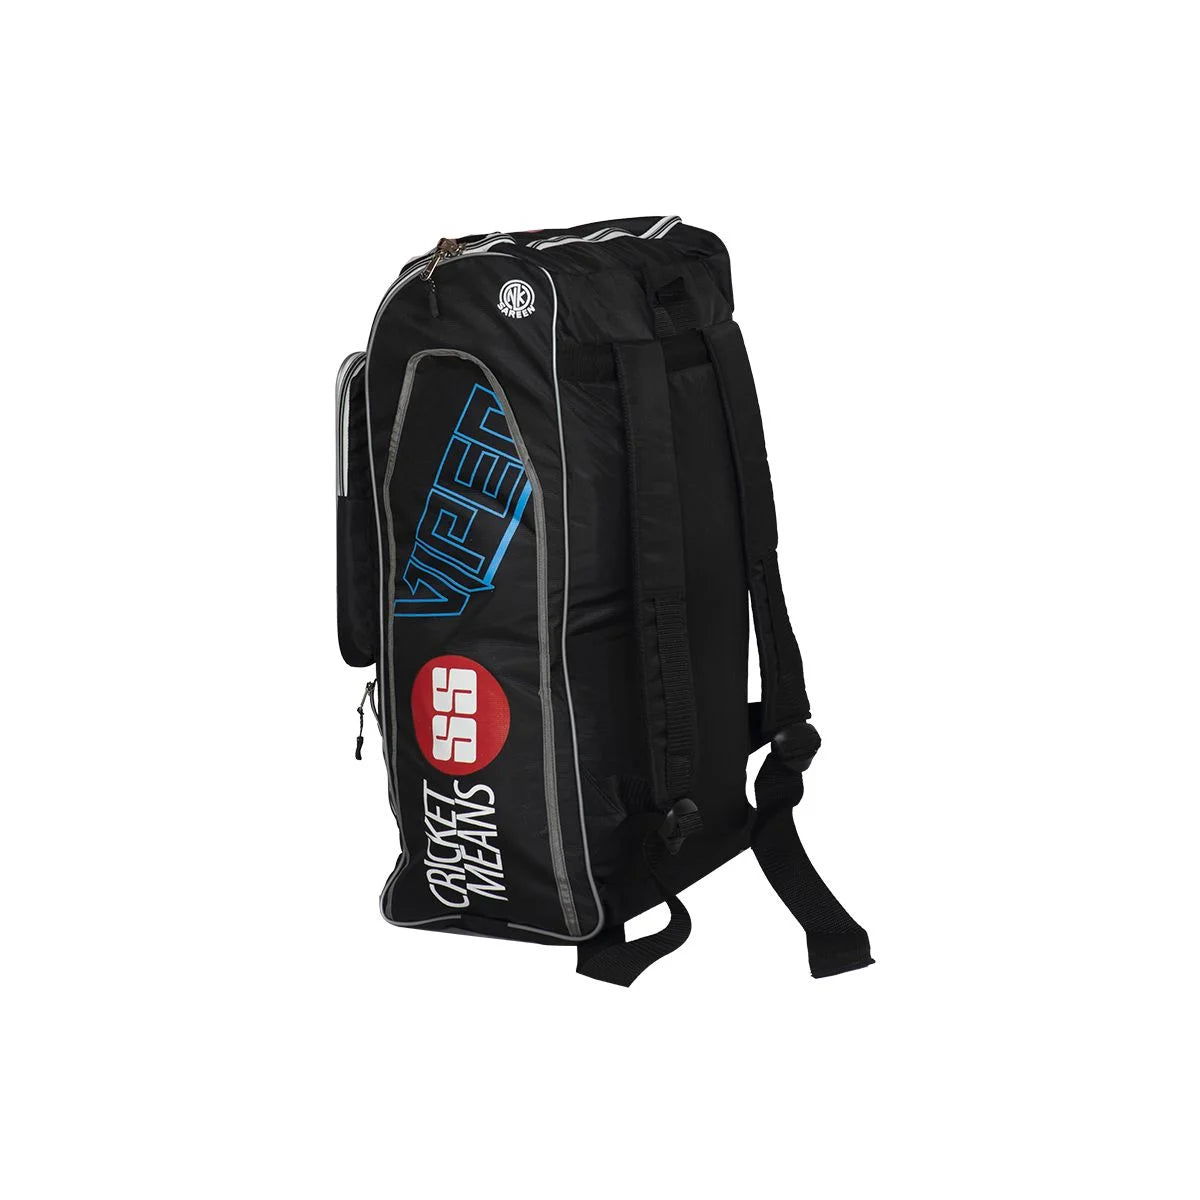 Black SS Viper duffle cricket kit bag featuring 100% Dri-Fit fabric, an adjustable buckle closure, unisex design, and sized to fit all with dimensions of 52cm to 58cm.